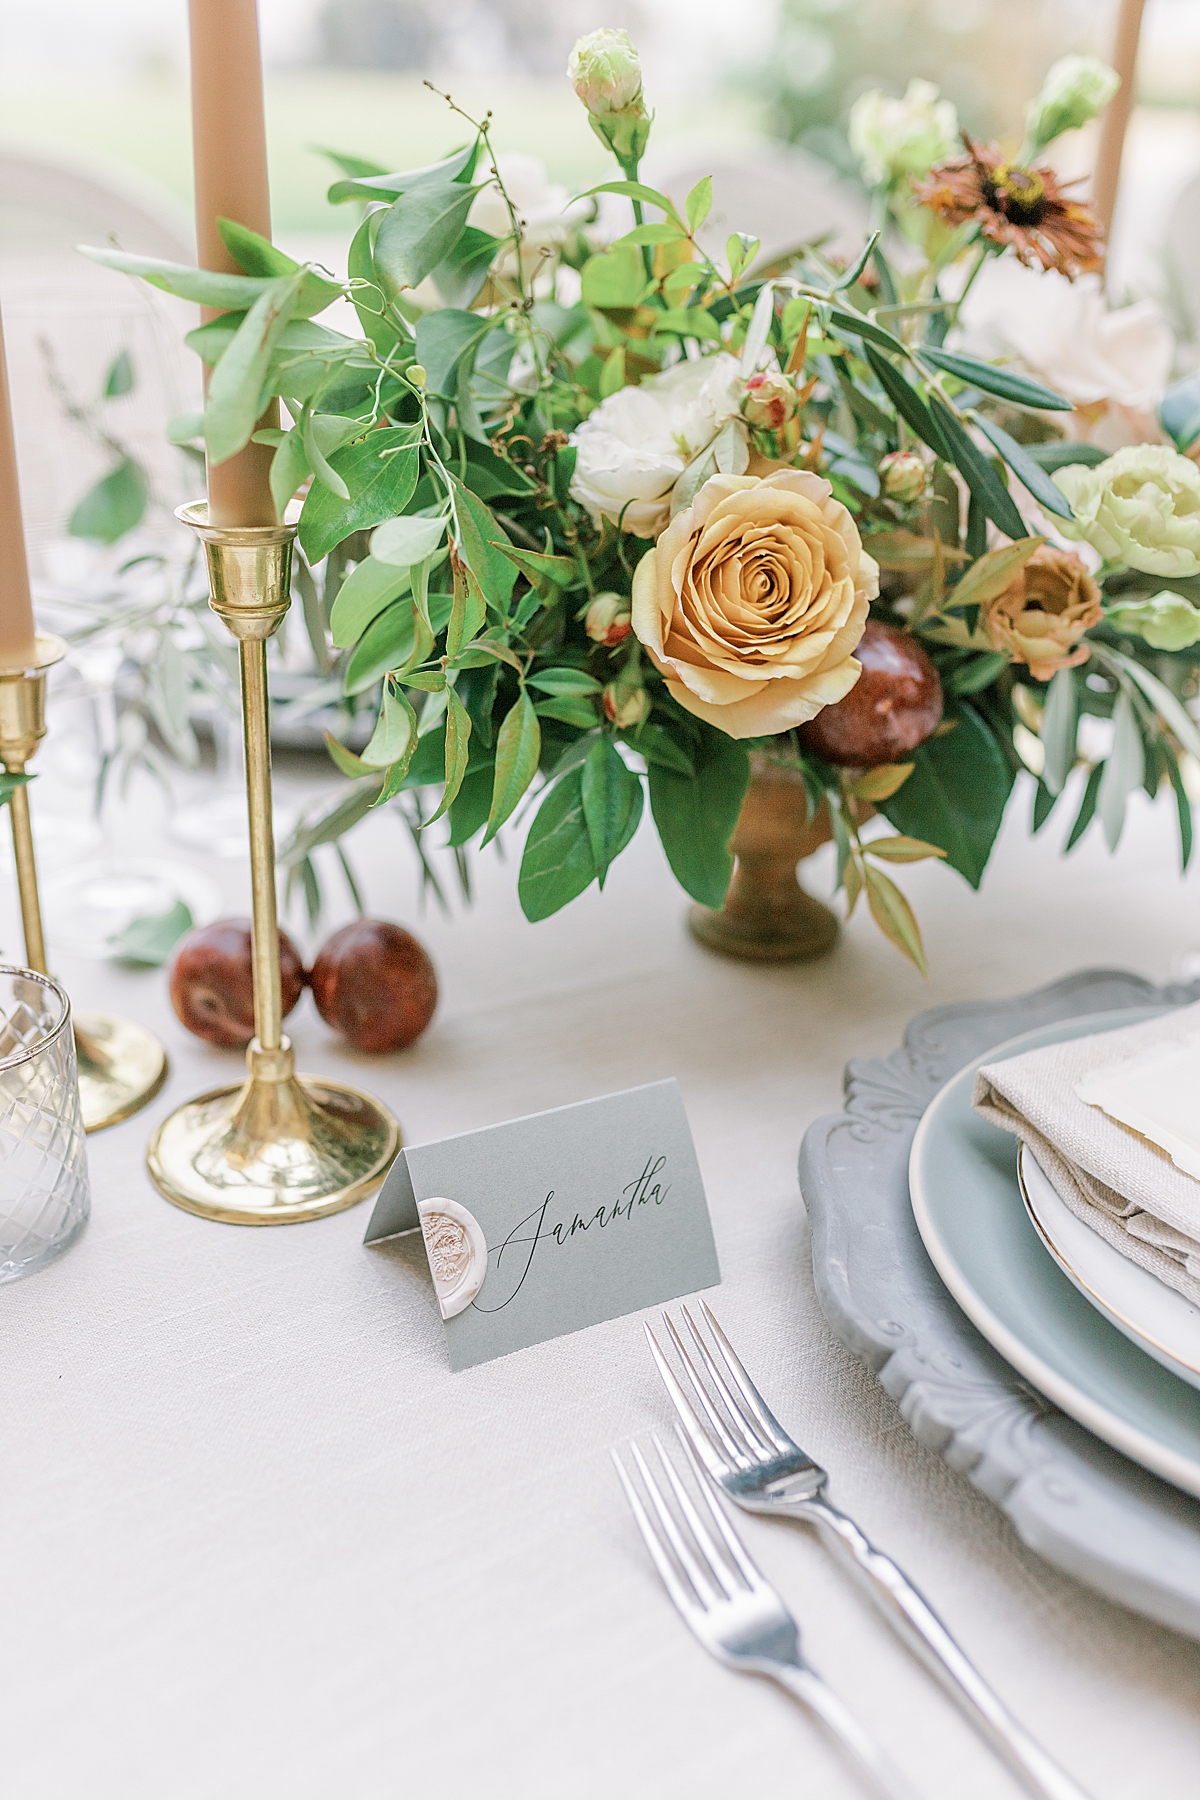 A place setting and name tag on the reception table at this Sunstone Villa Wedding editorial.